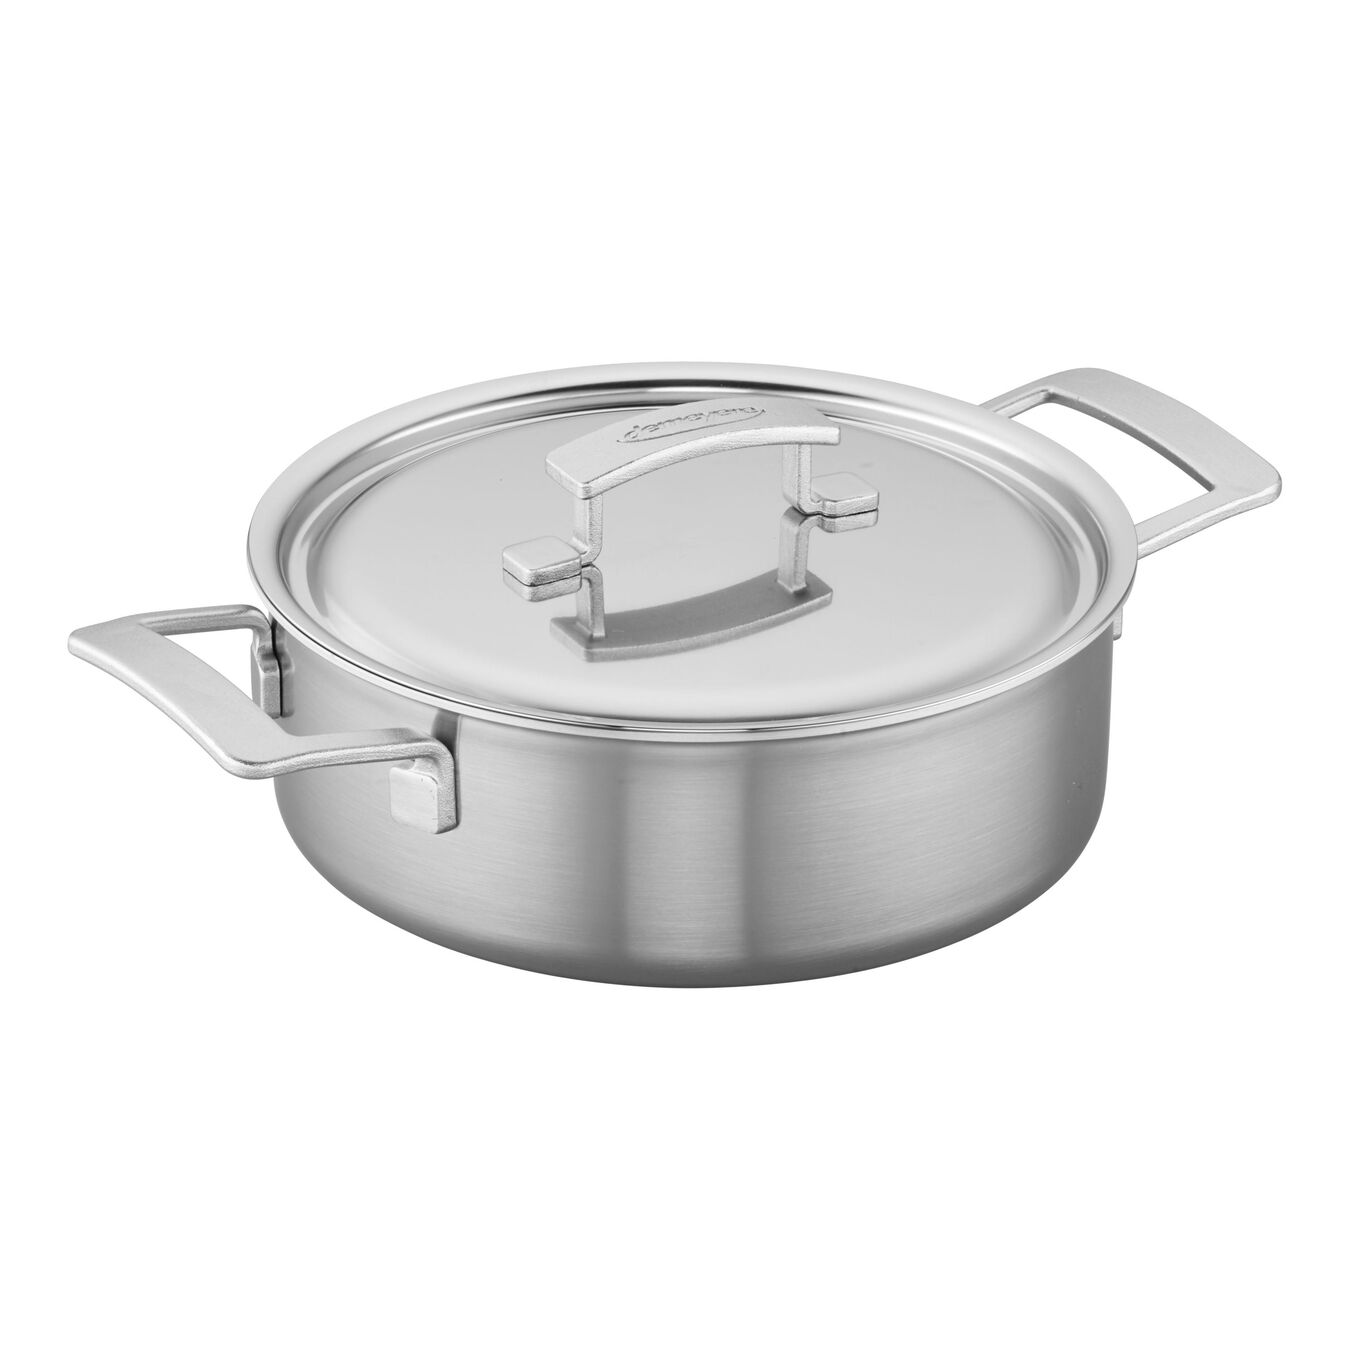 4 qt Deep Sauté Pan with Lid, 18/10 Stainless Steel ,,large 1